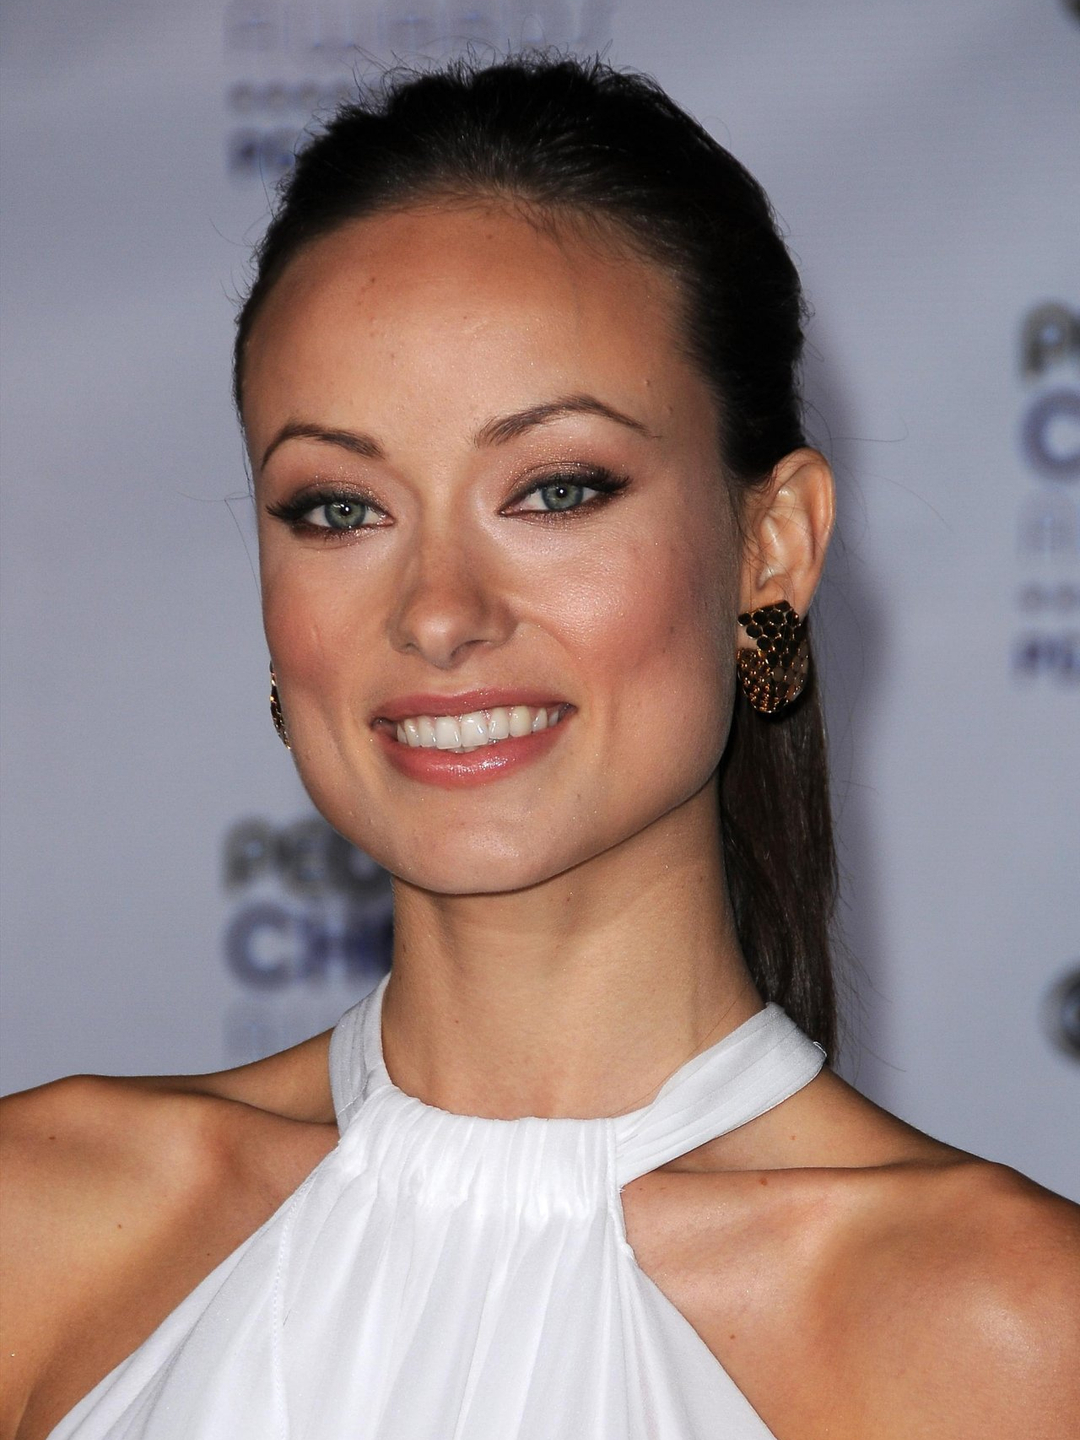 Olivia Wilde unphotoshopped pictures